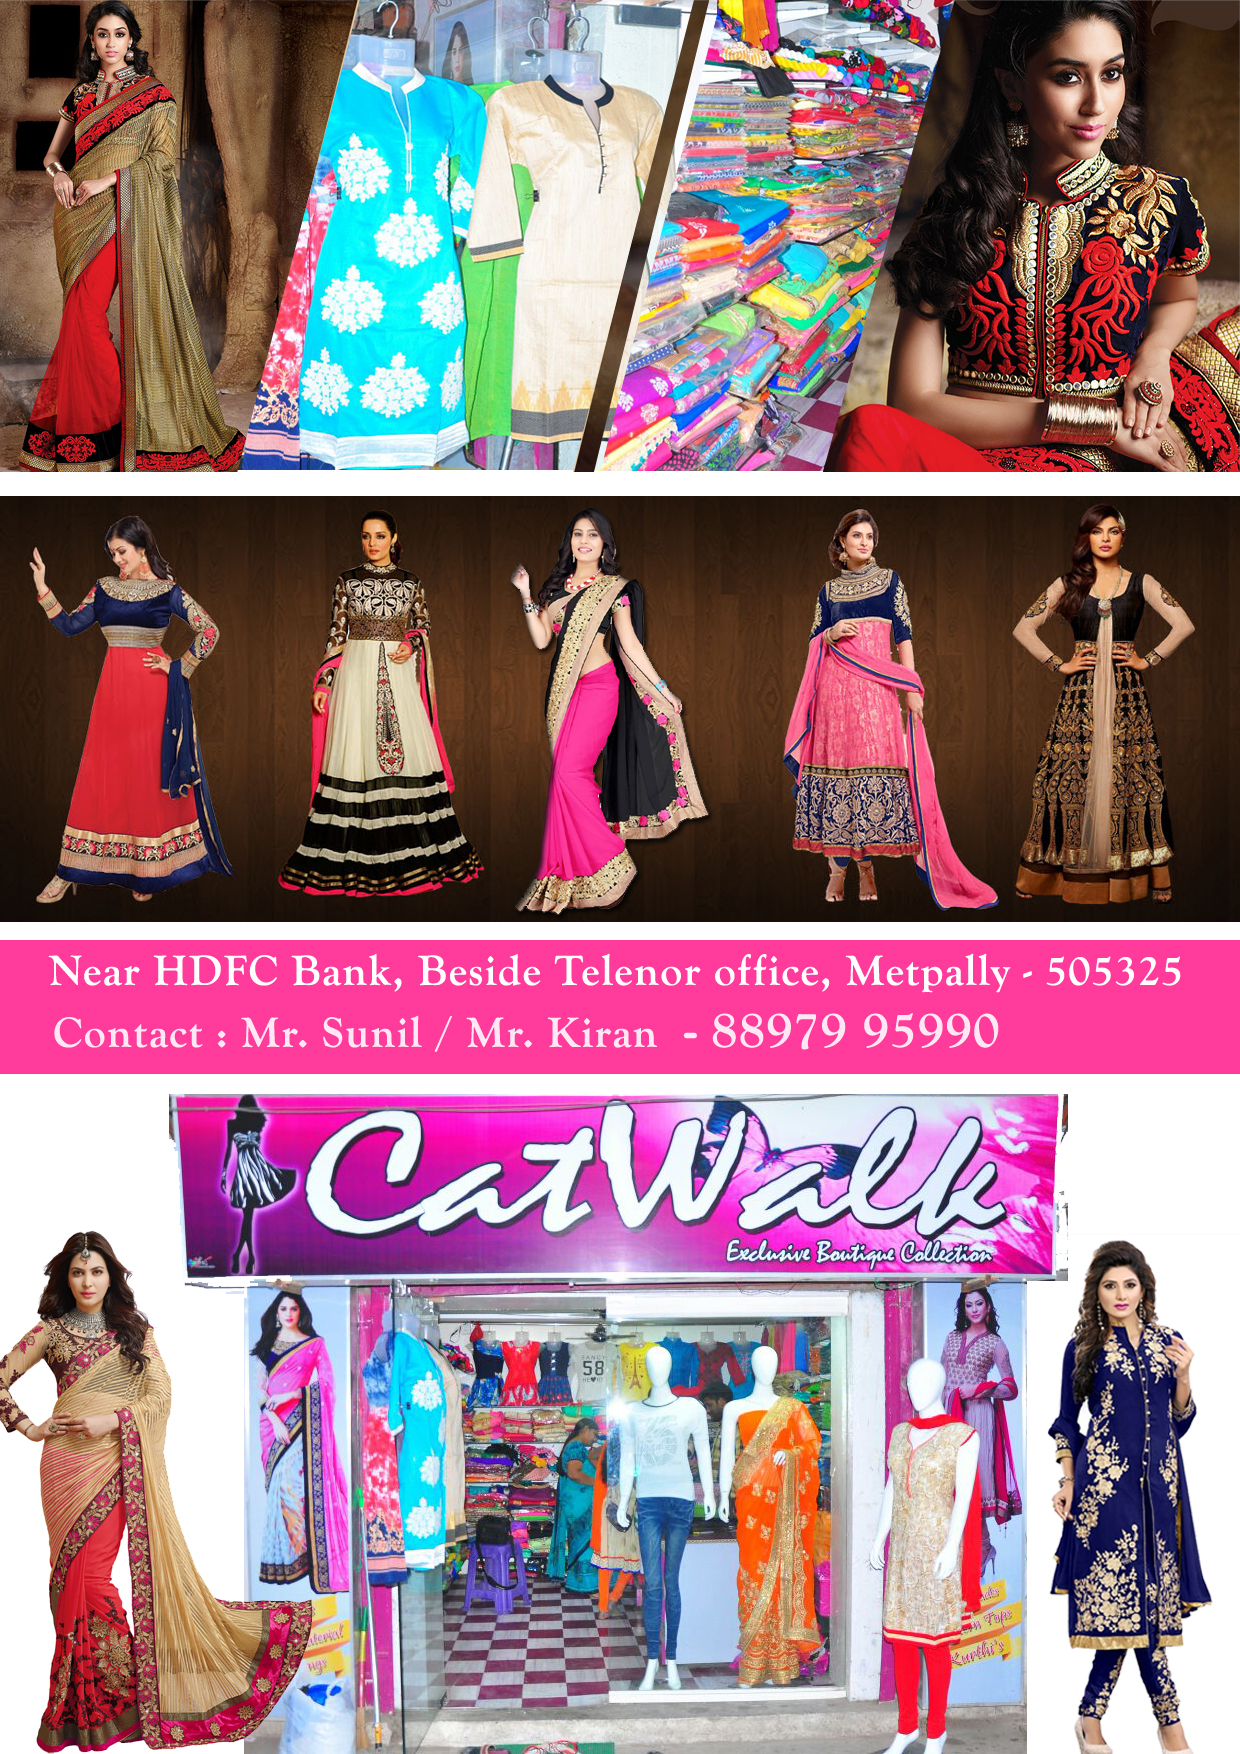 CAT WALK : Exclusive Boutique Collection for Ladies -